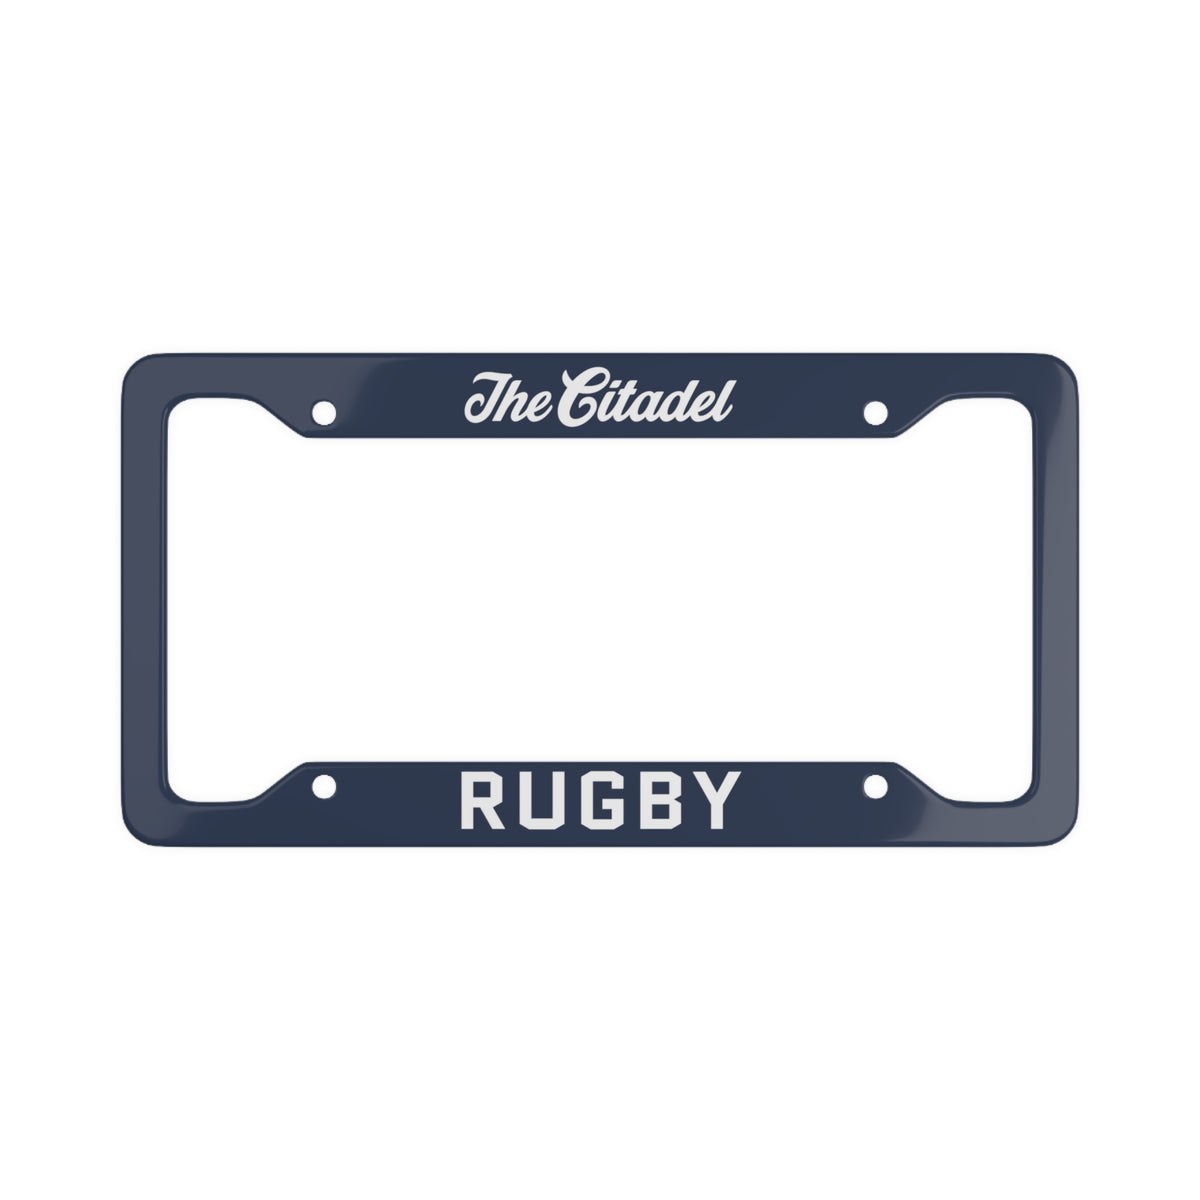 The Citadel, Word Mark, Club Sports, Rugby License Plate Frame